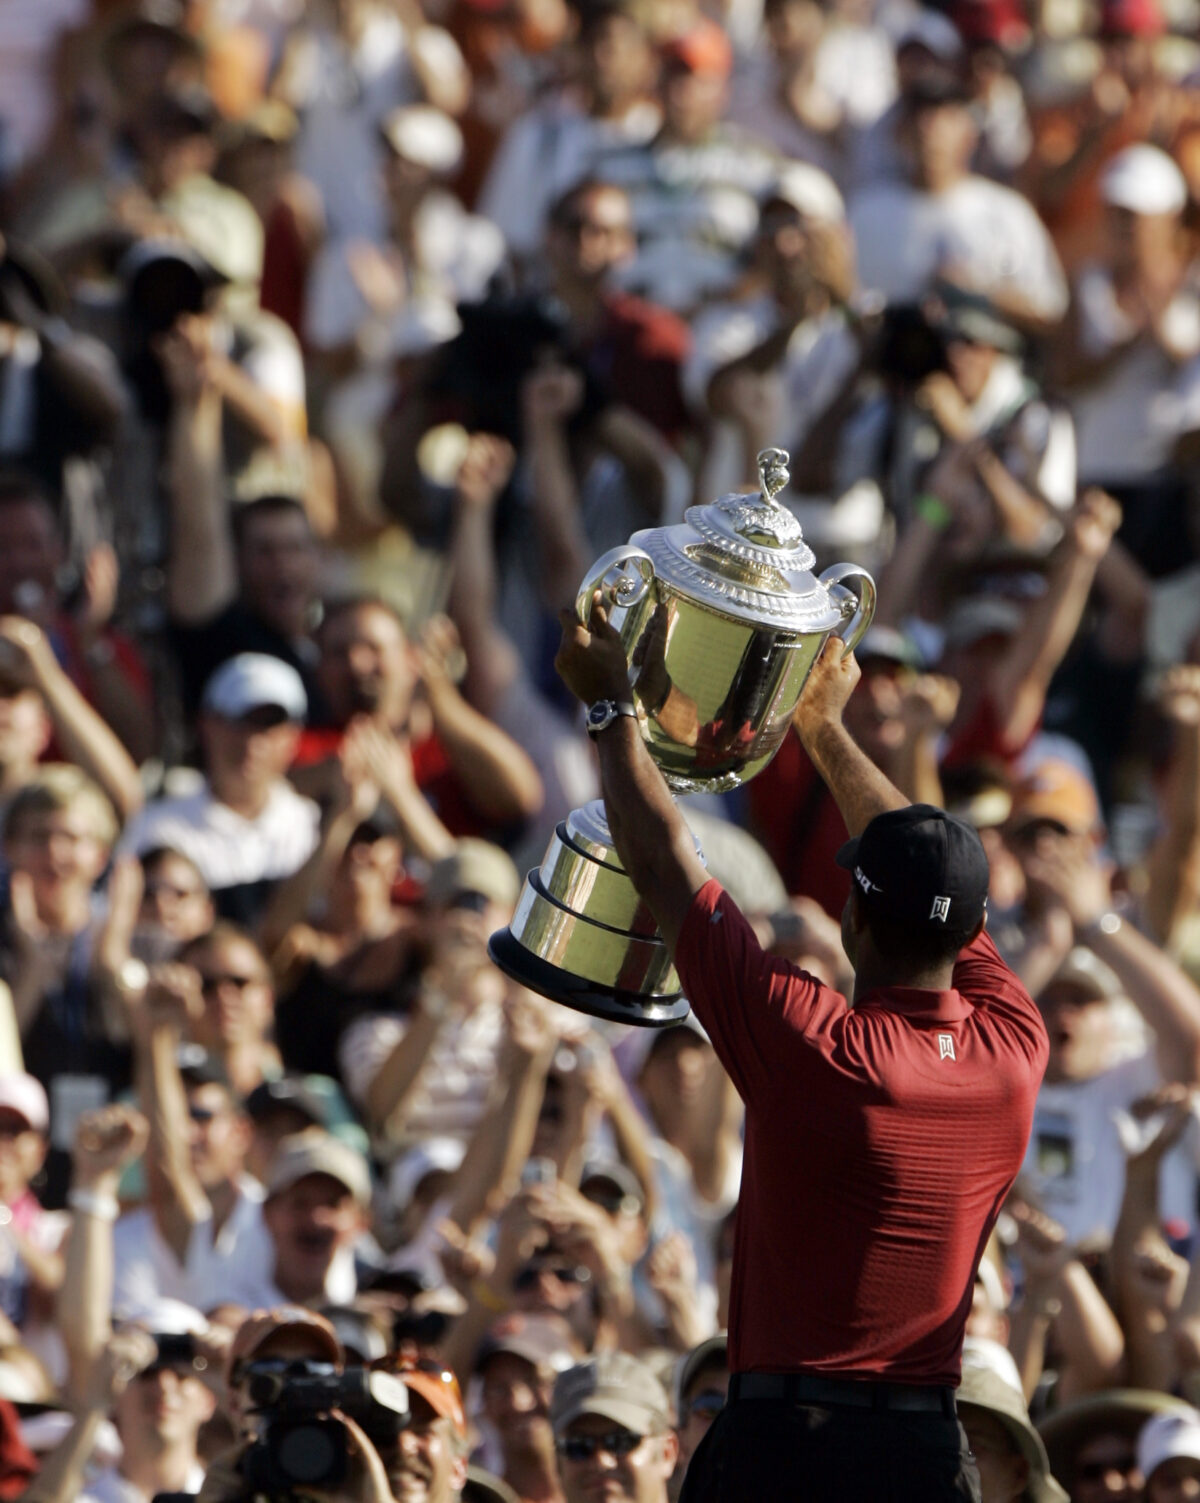 Things to know about the Wanamaker Trophy, which goes to winner of PGA Championship